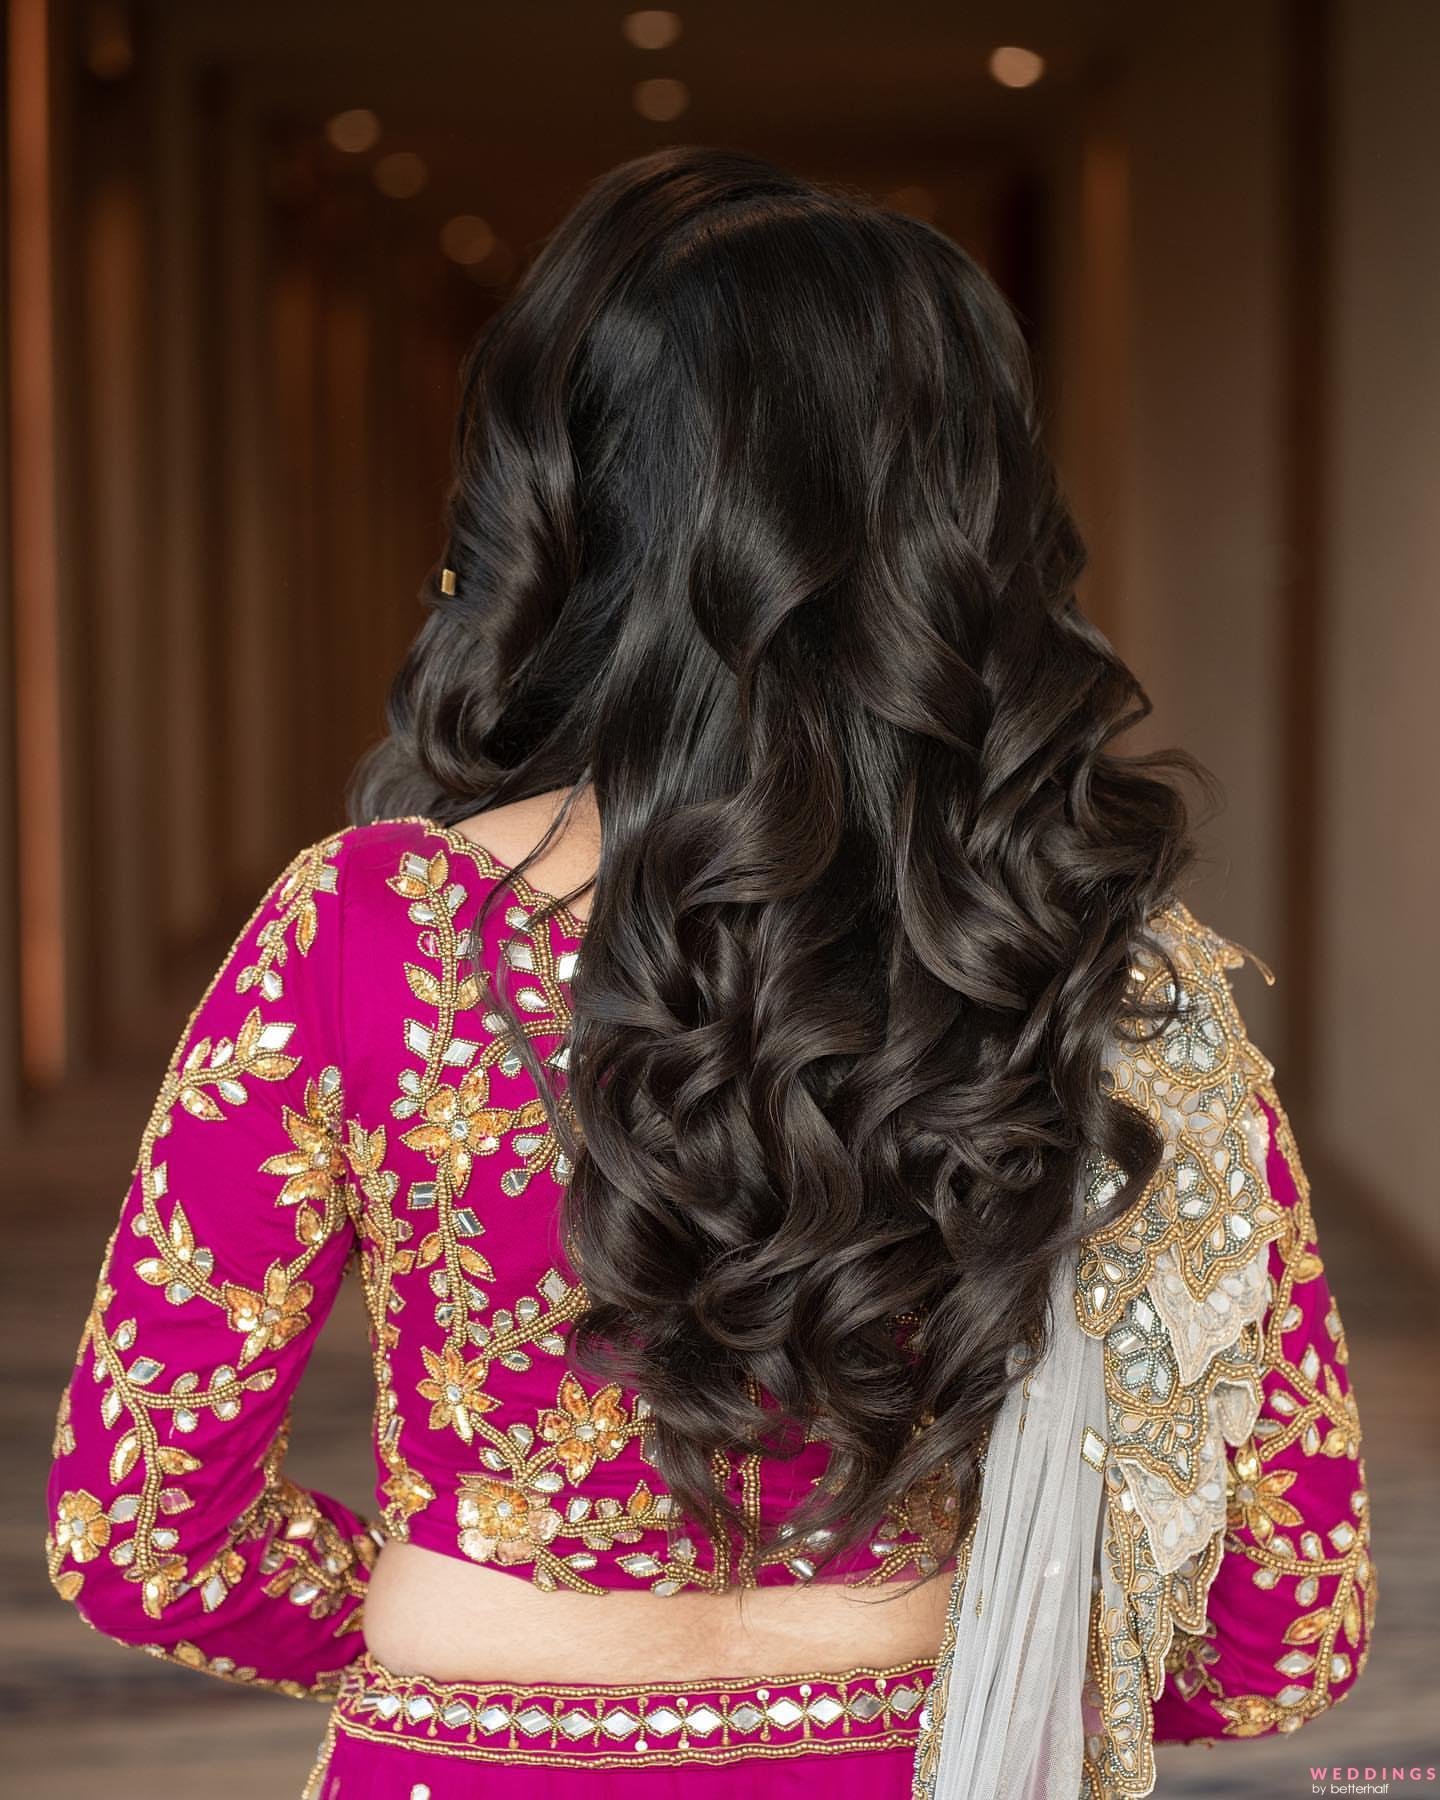 7 Stunning Bridal Hairstyles To Try Out On Your Big Day